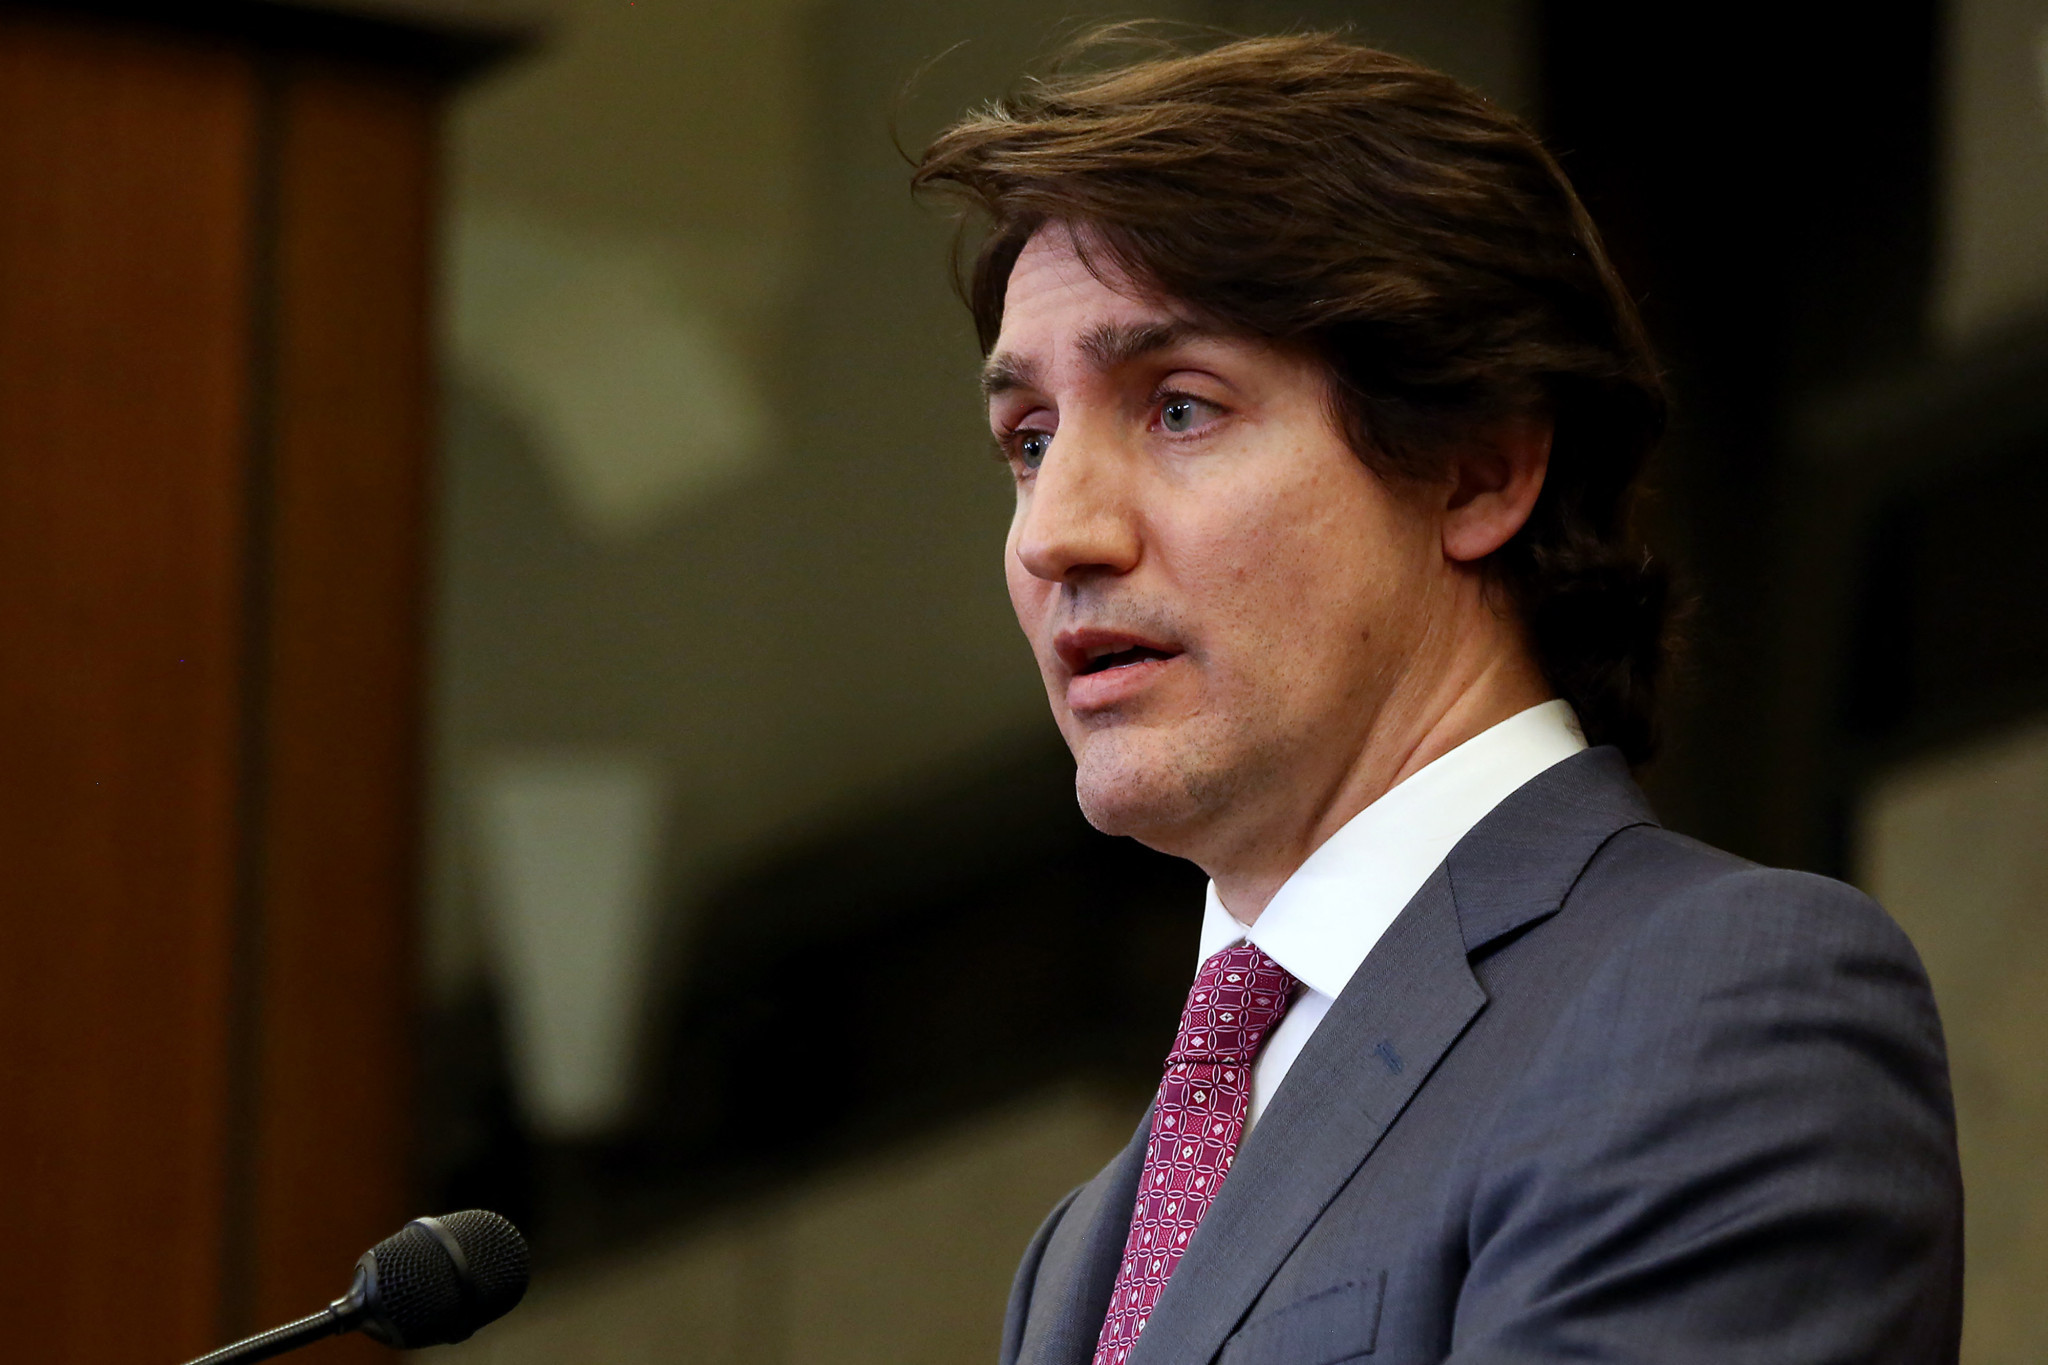 Canadian Prime Minister Justin Trudeau has described Hockey Canada's actions as 